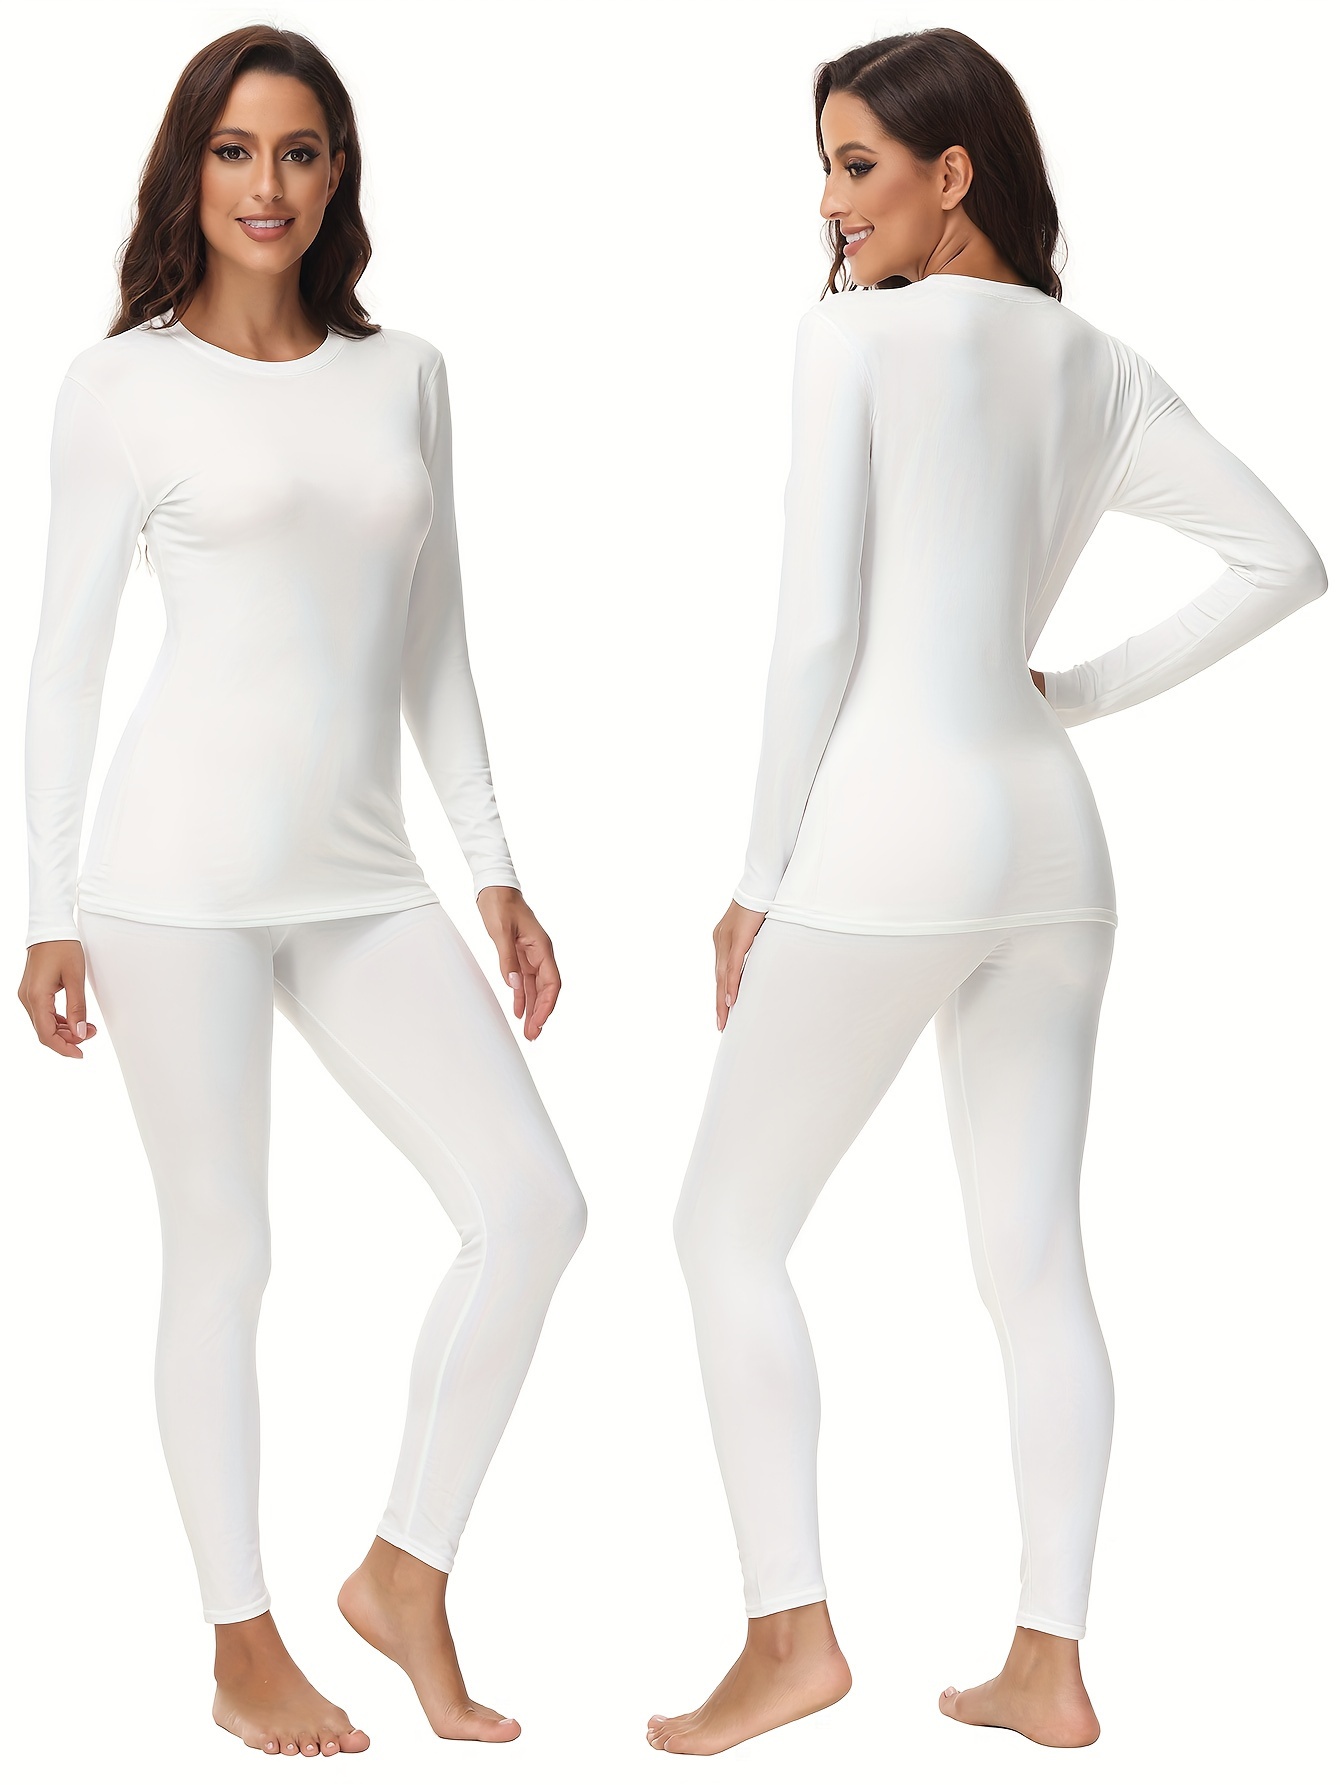 Womens Thermal Underwear Set Long Johns Base Layer Fleece Lined Cold  Weather Soft Top Bottom Cream White Medium